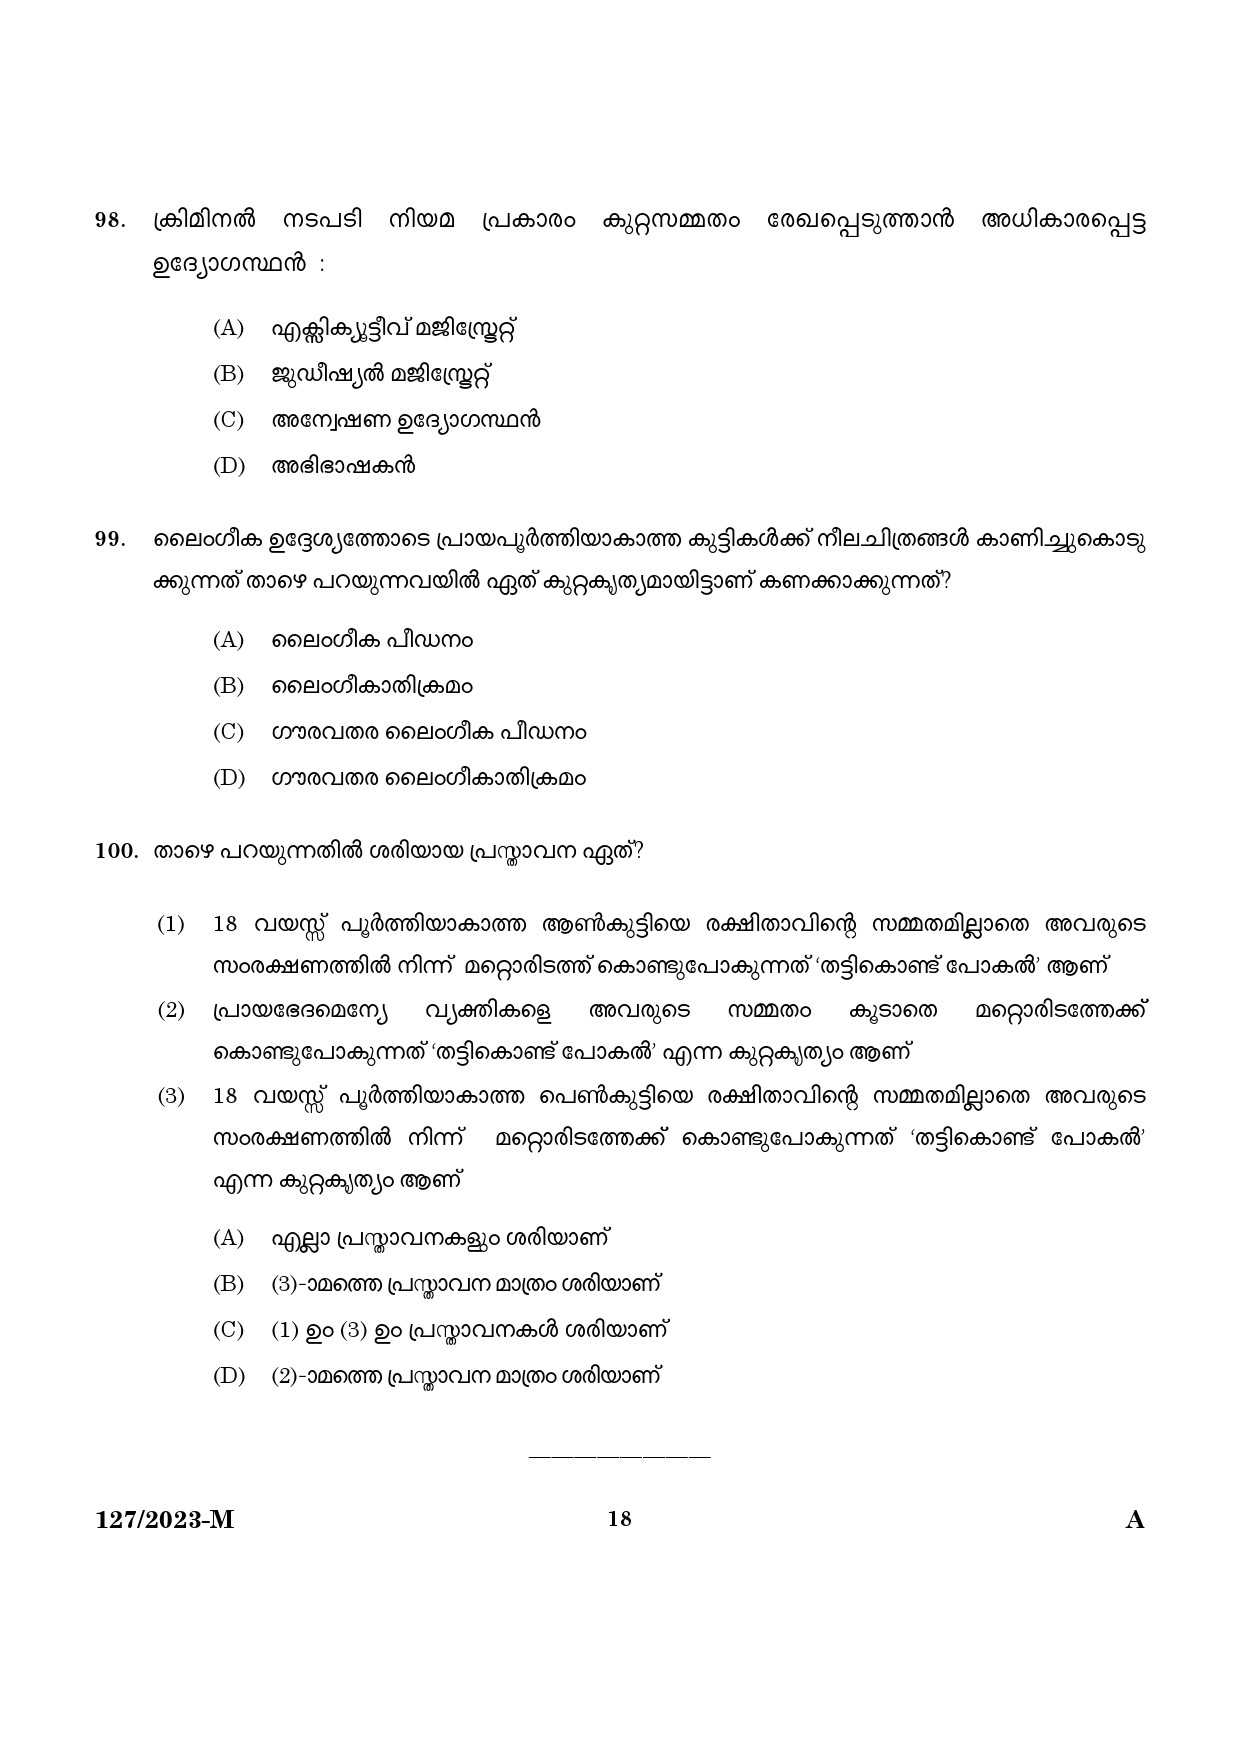 KPSC Police Constable Armed Police Battalion Malayalam Exam 2023 Code 1272023 M 16